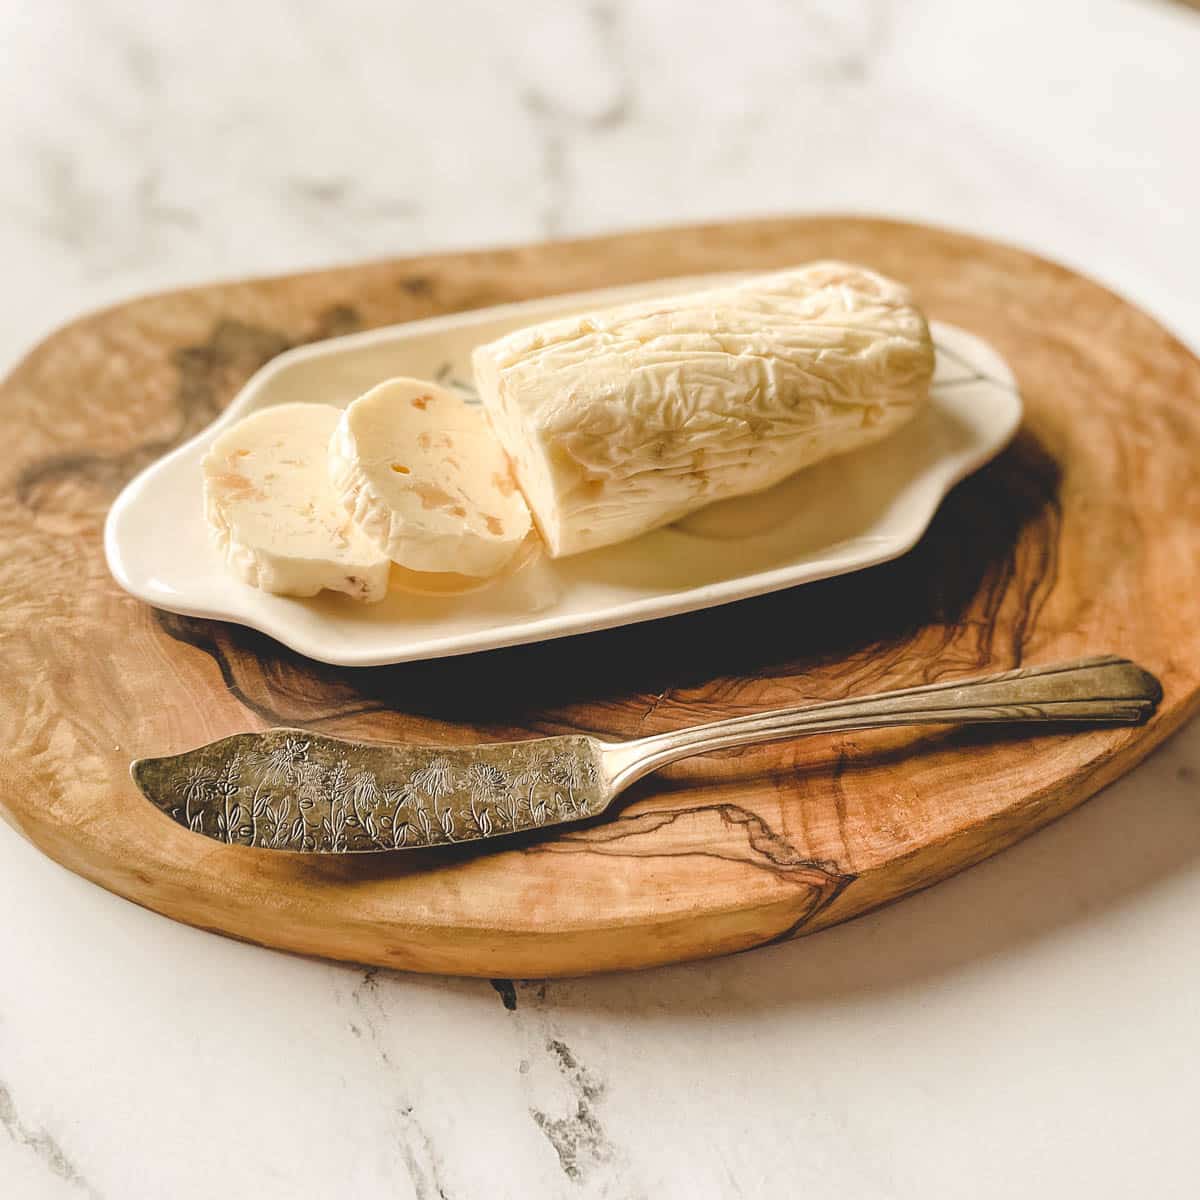 A log of roasted garlic butter is shown on a white butter dish with a butter knife.